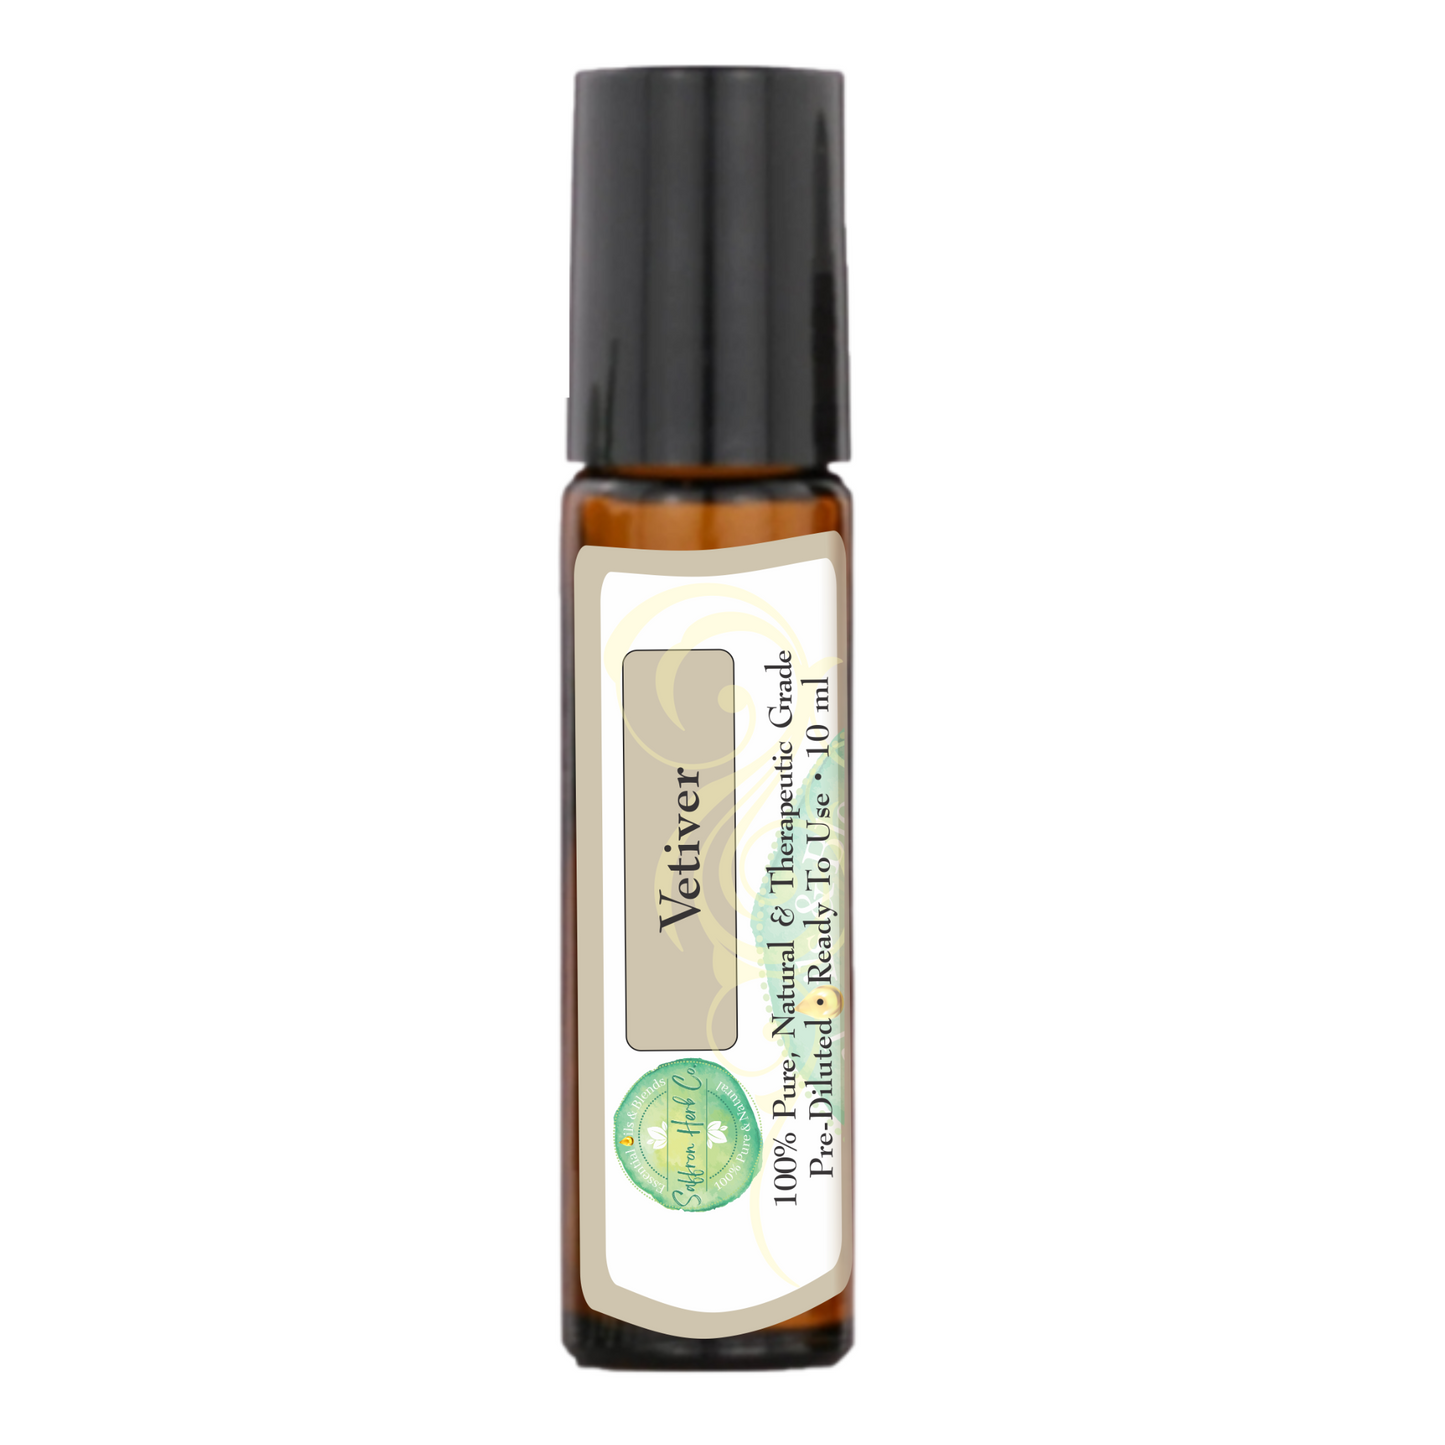 Vetiver Essential Oil Roller Bottle Blend • 100% Pure & Natural • Pre-Diluted • Ready To Use